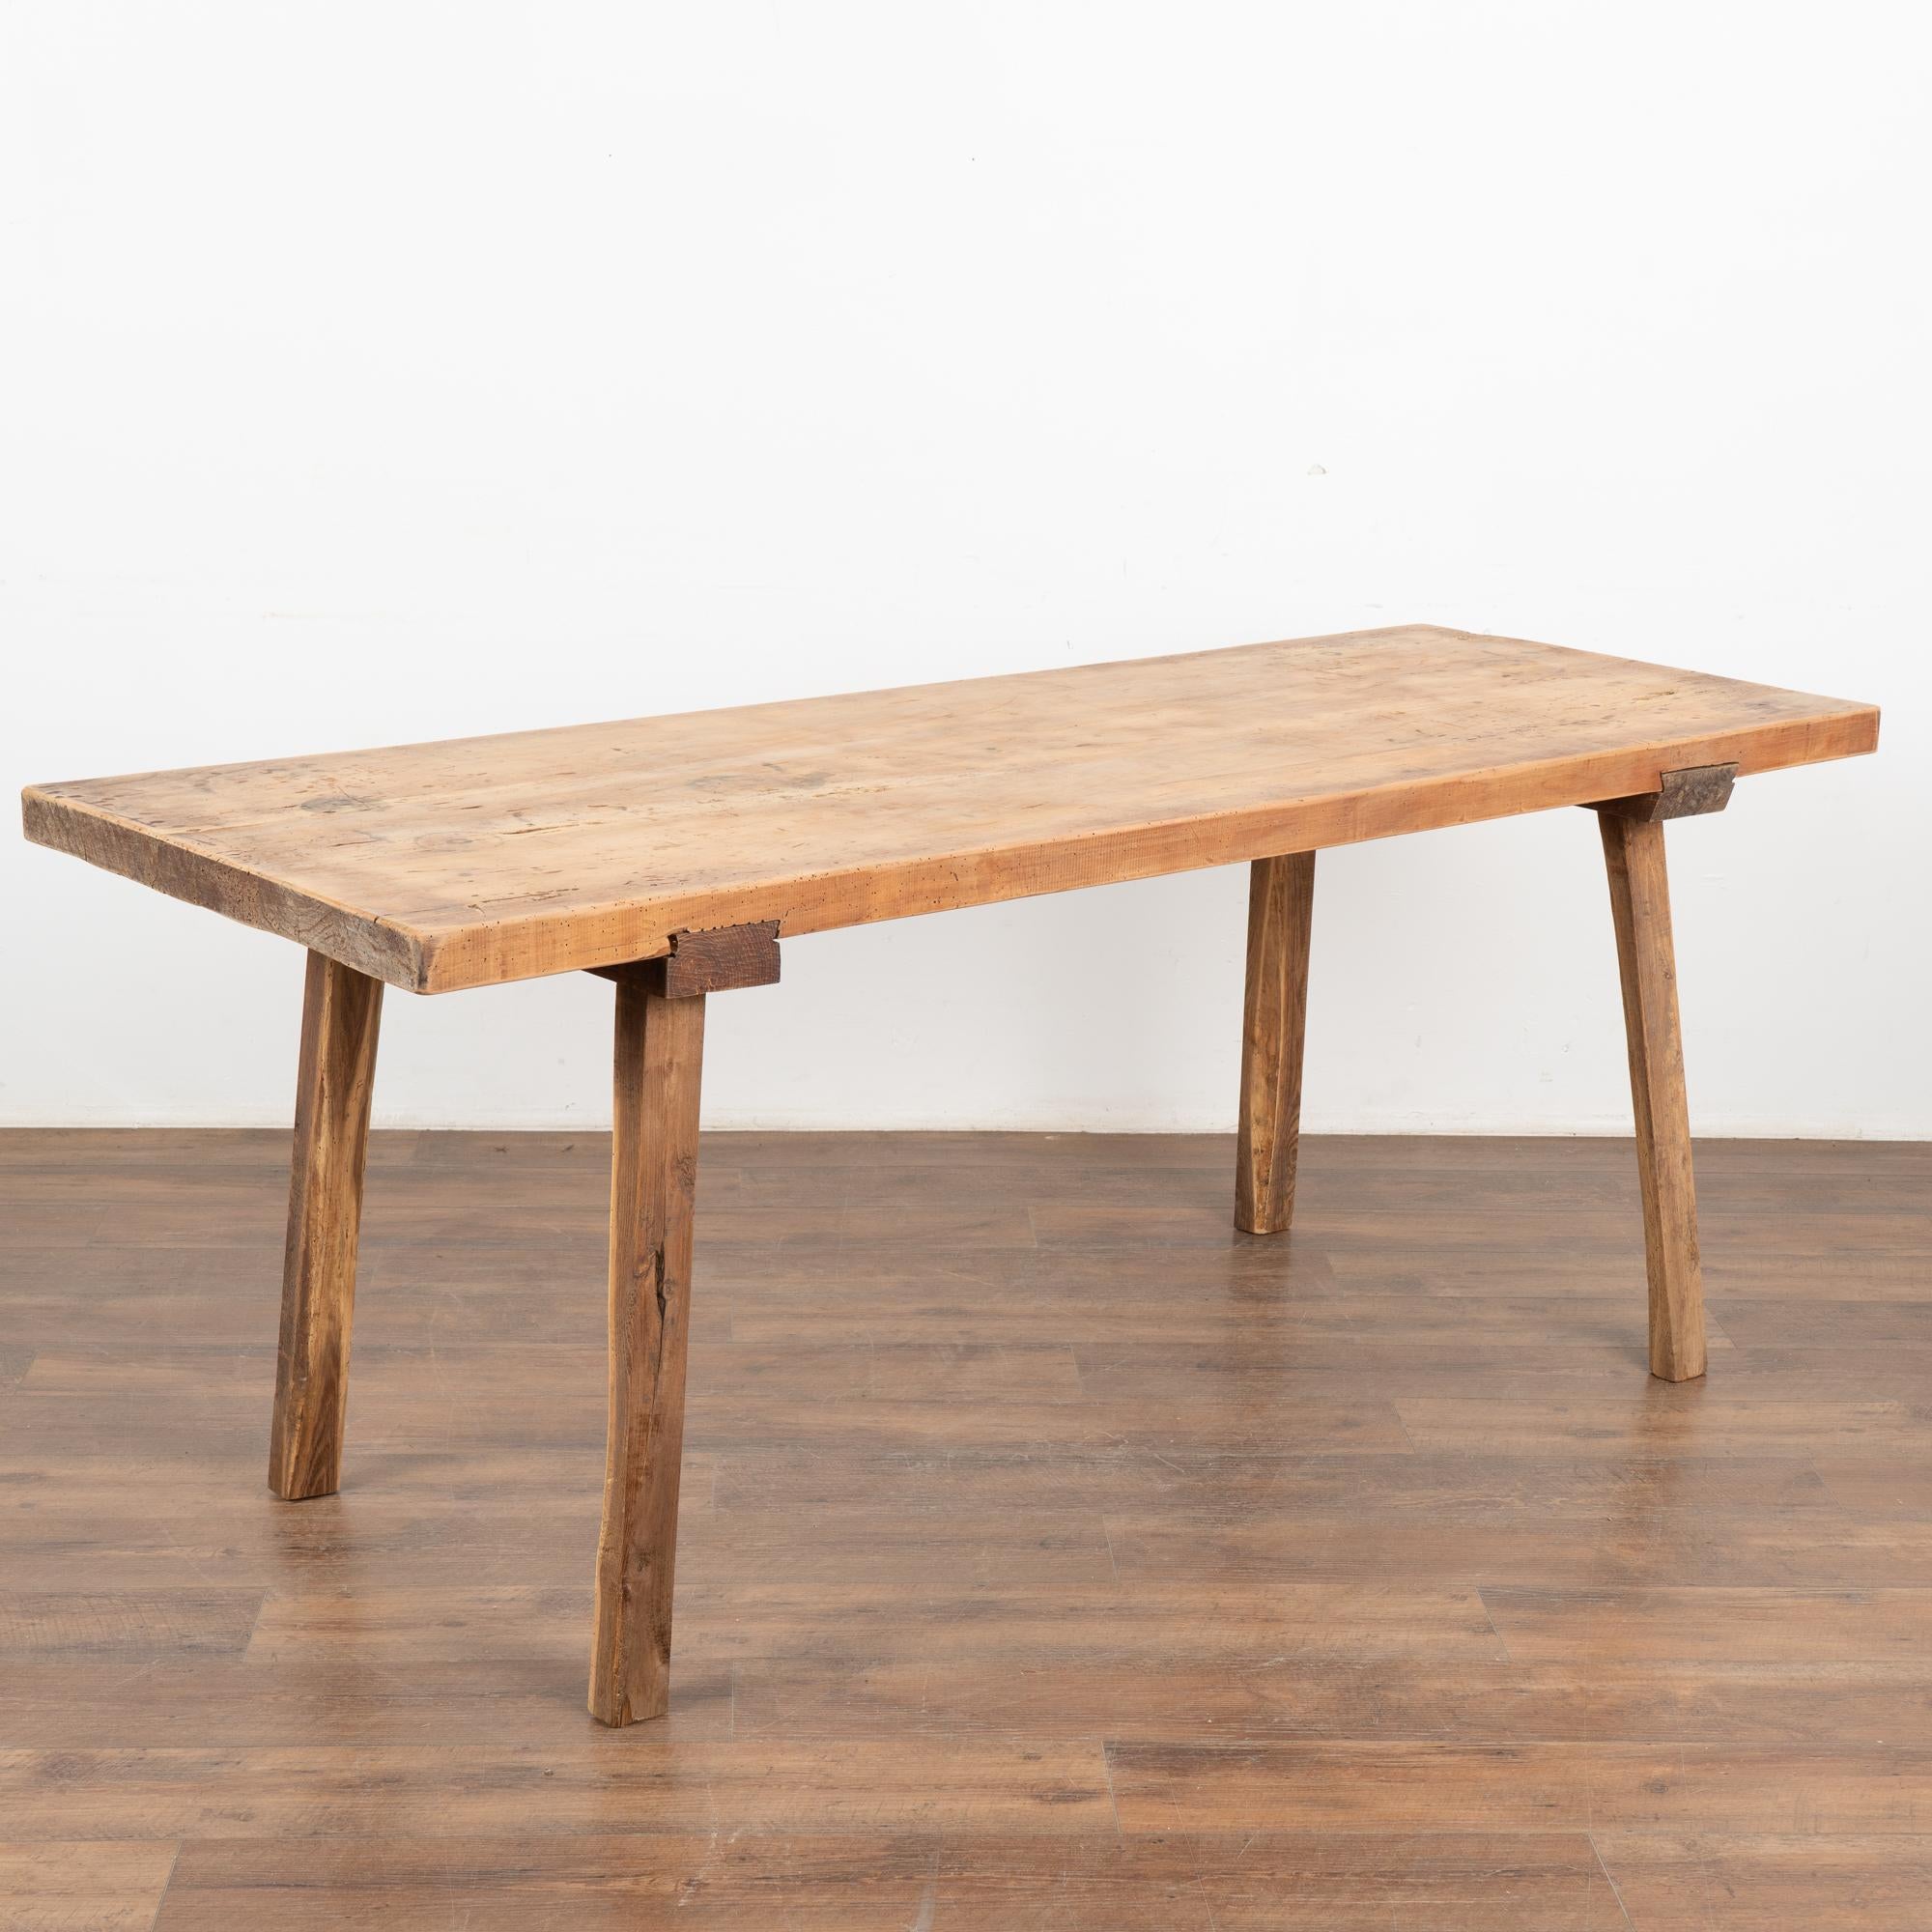 Rustic Plank Top Console Table With Peg Legs, Hungary circa 1900 For Sale 5